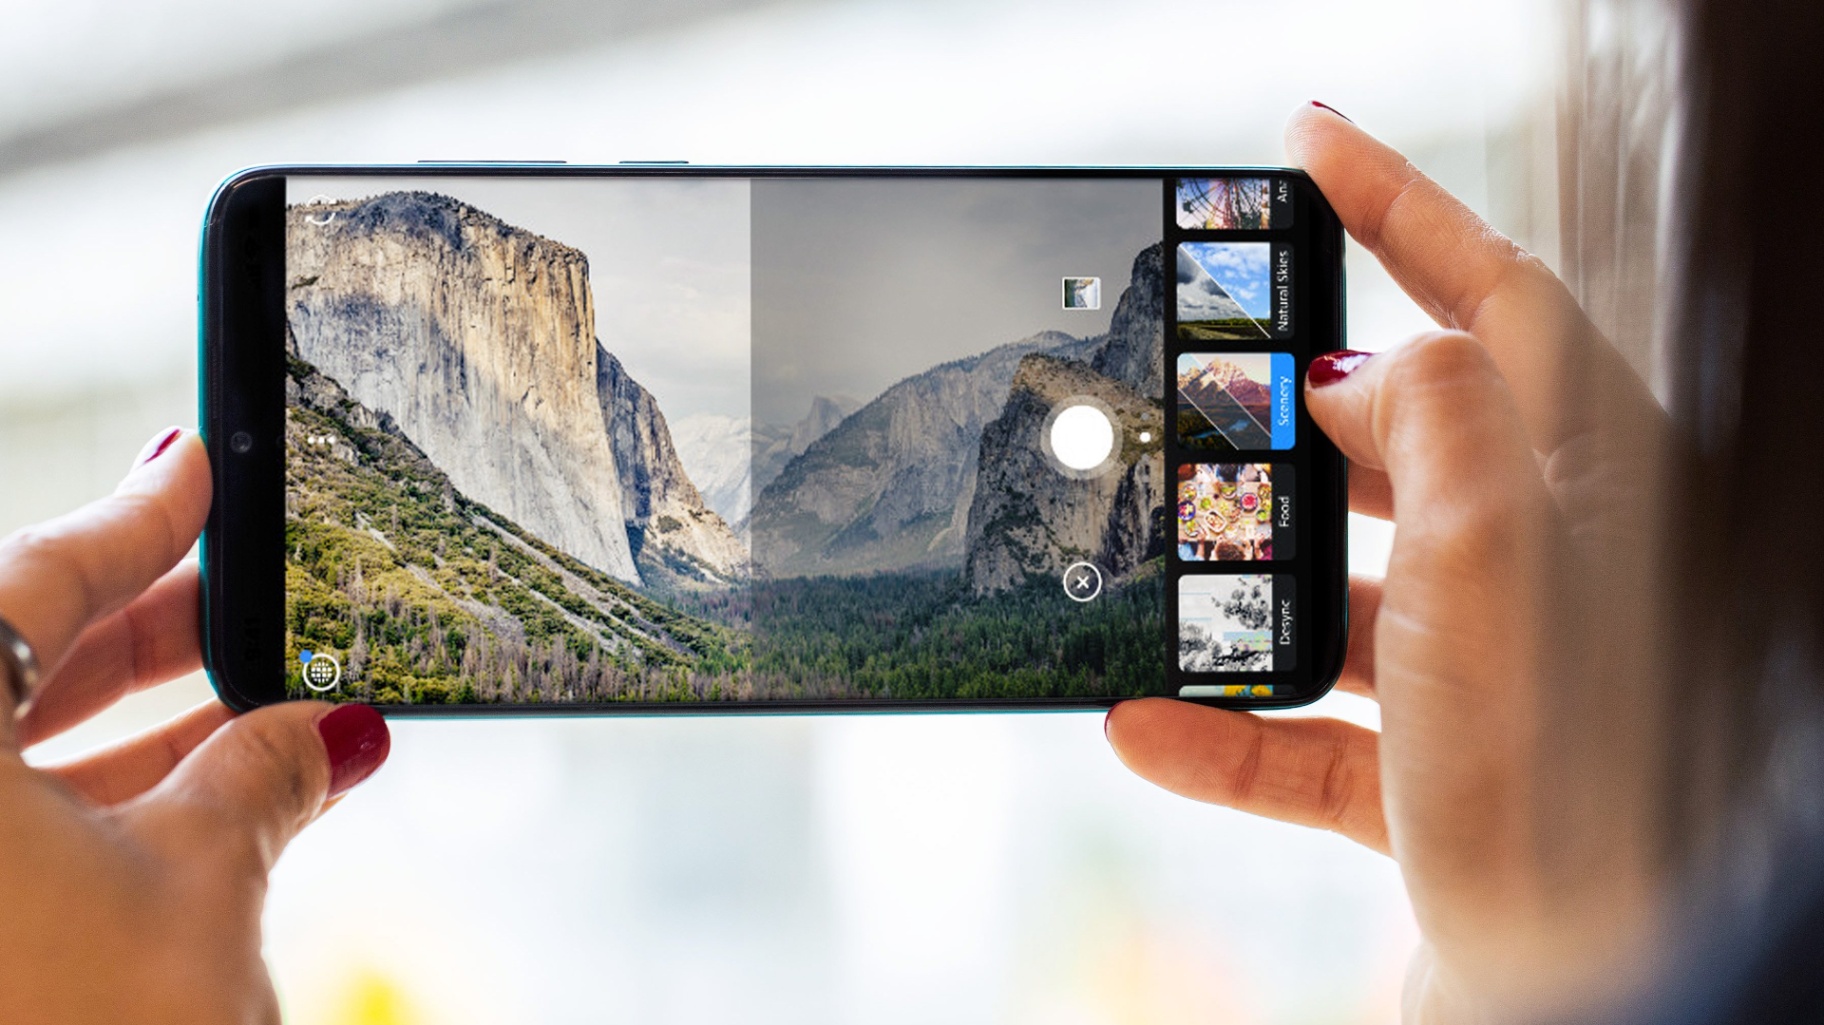 Find Out Why these 10 Camera Apps Are the Best